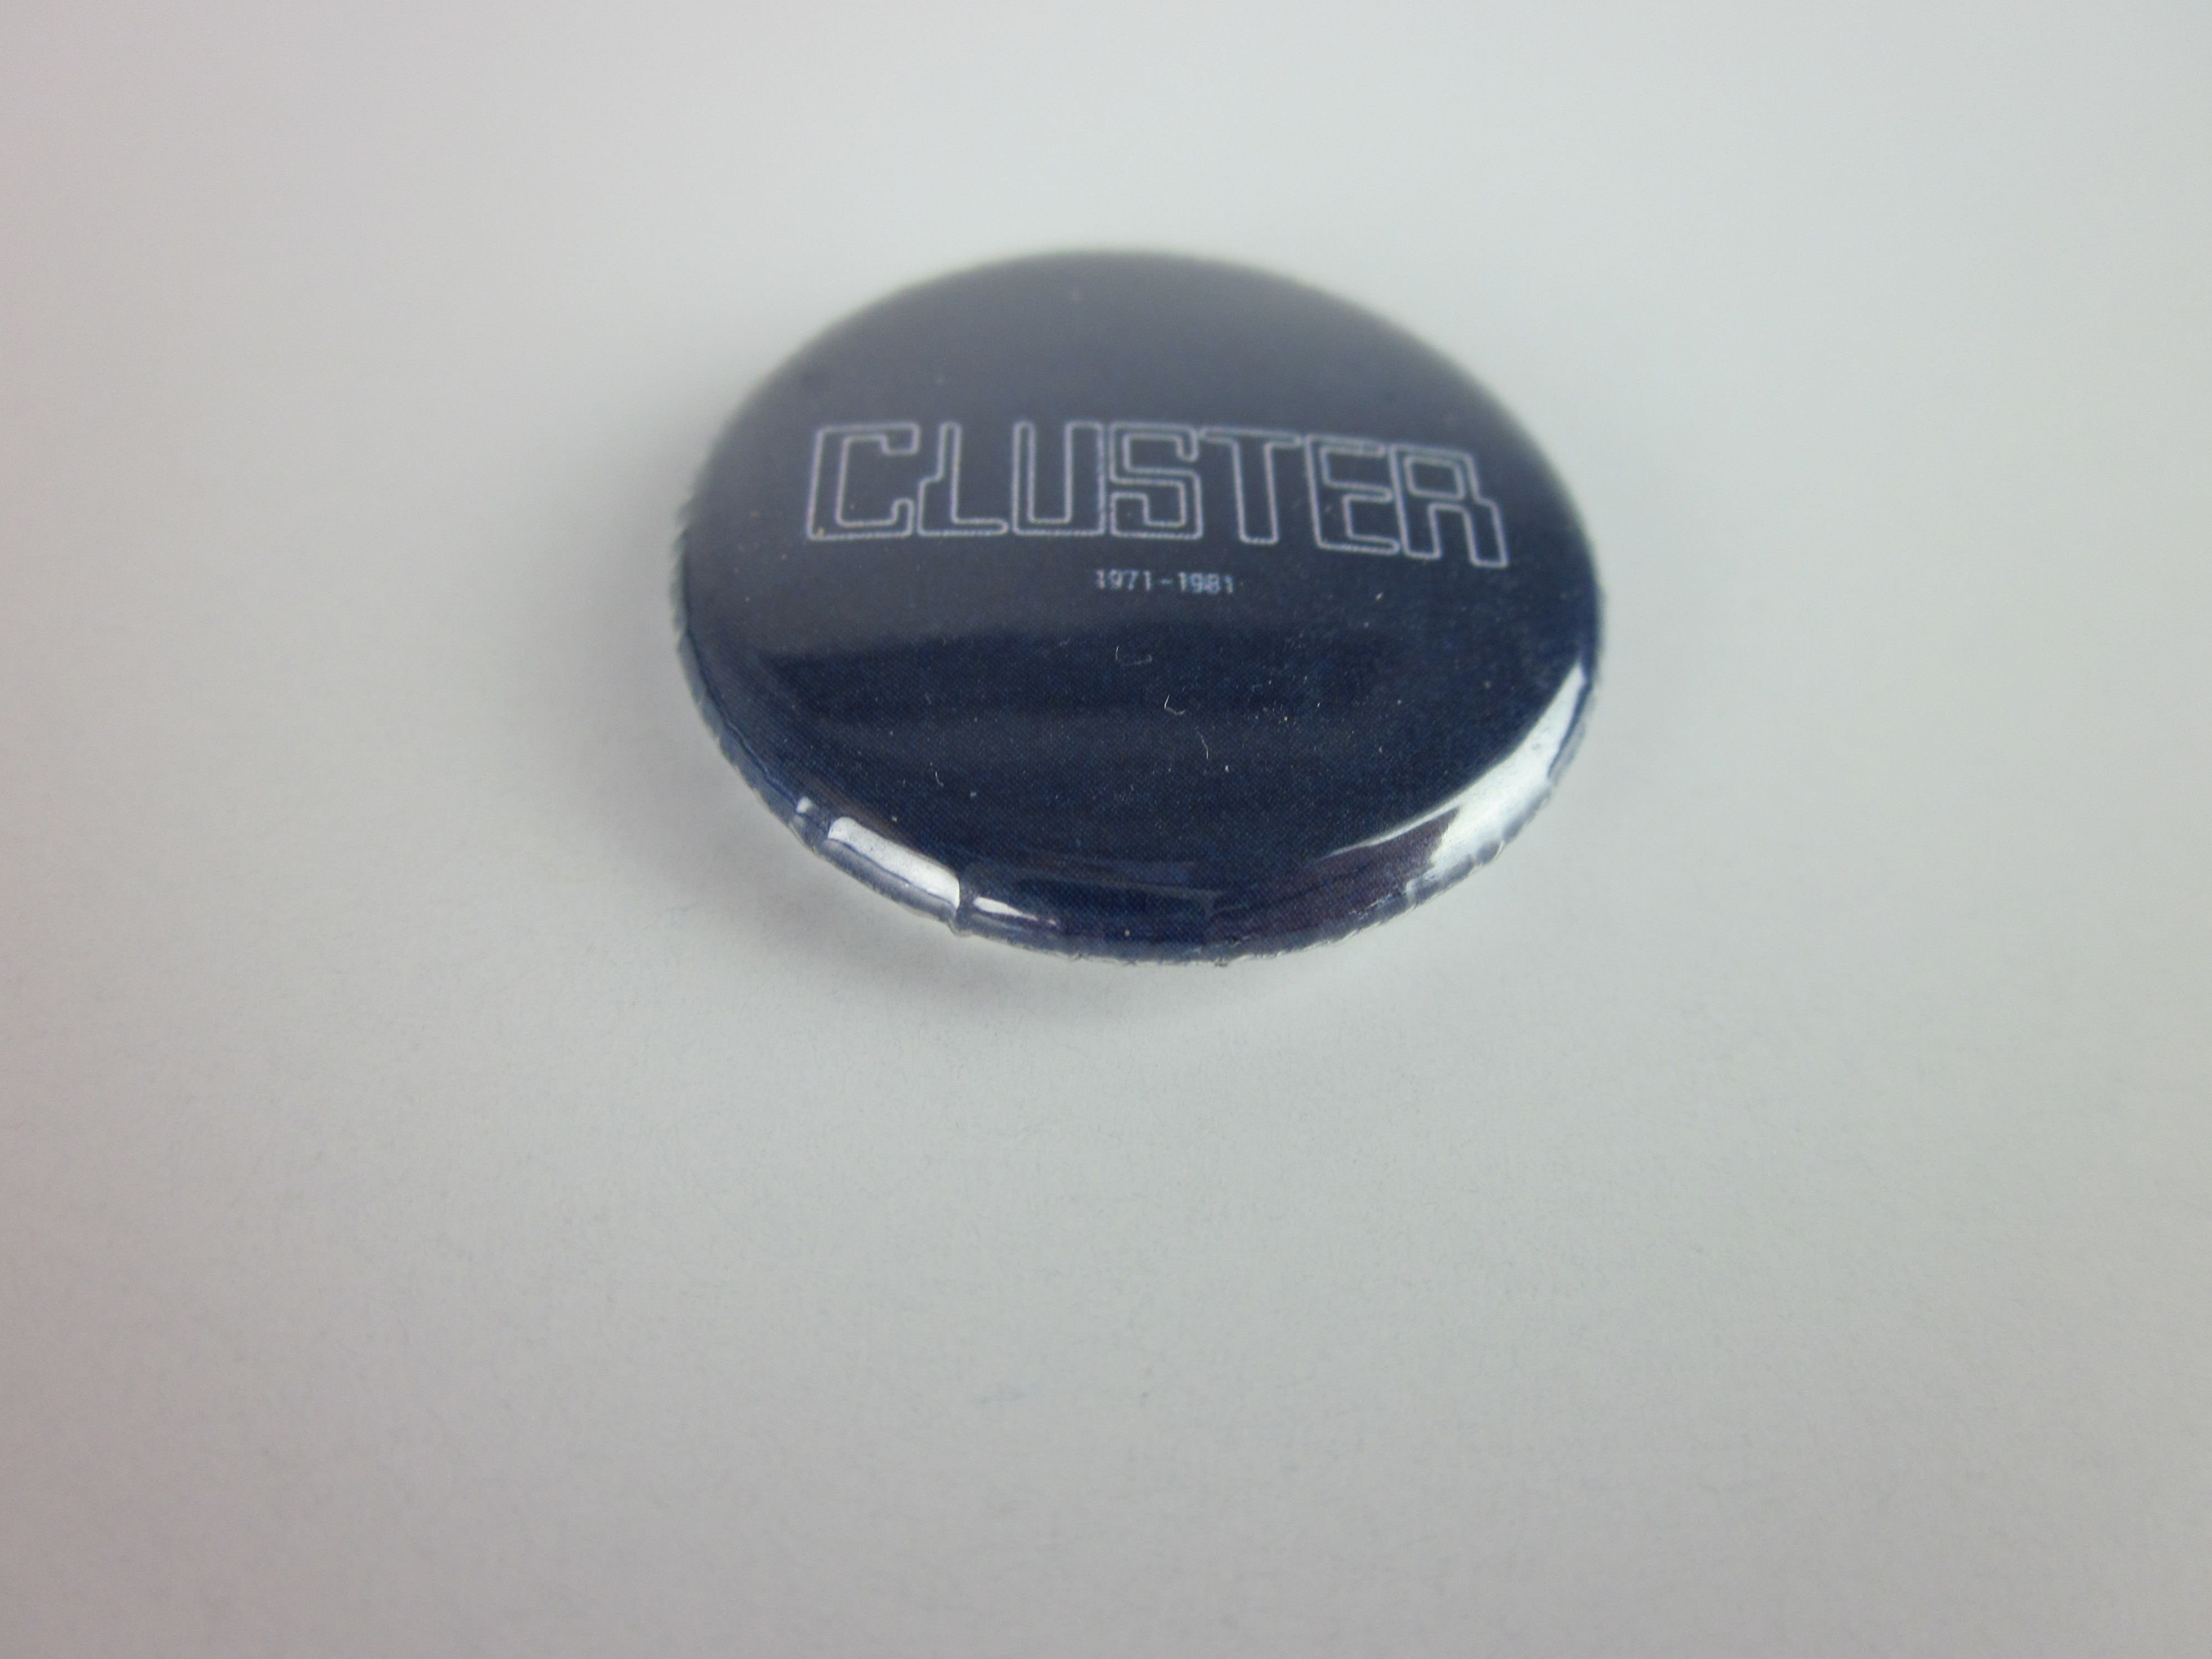 Cluster 1971-1981 Button